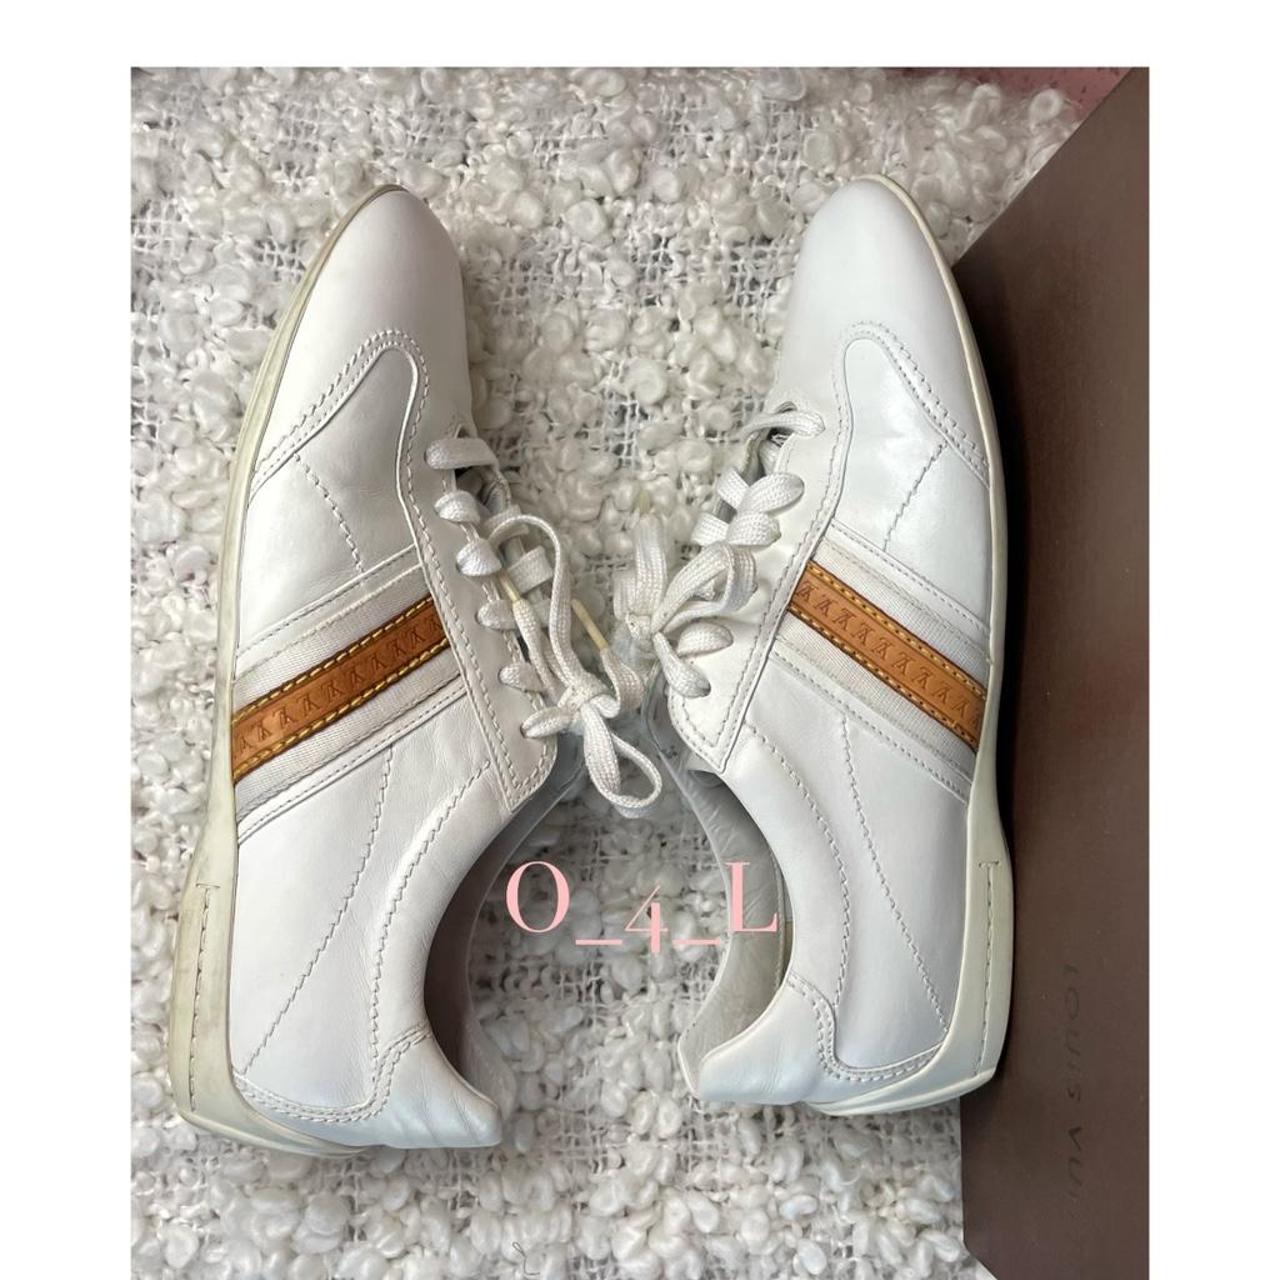 Authentic Louis Vuitton sneakers. New shoelaces and - Depop